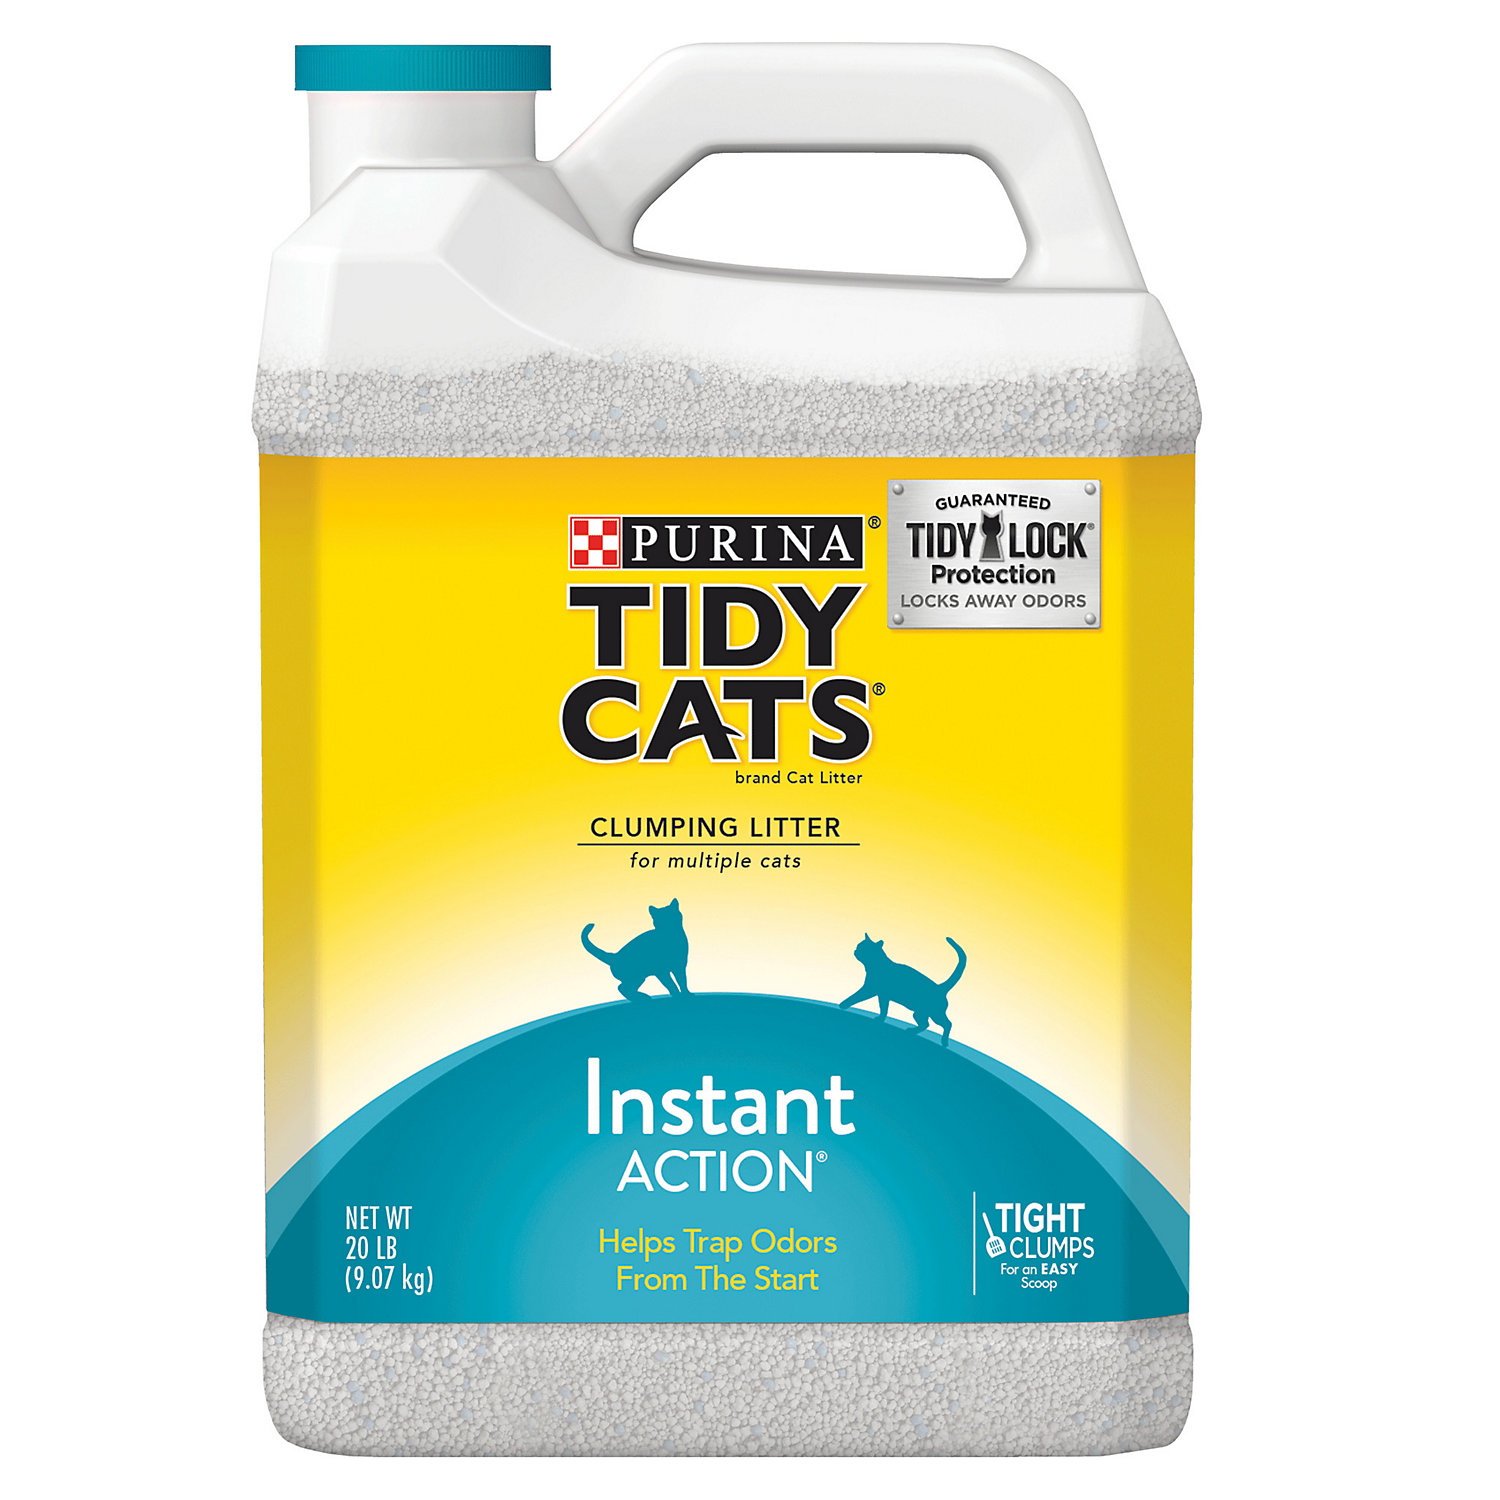 Purina Tidy Cats Clumping Litter Instant Action for Multiple